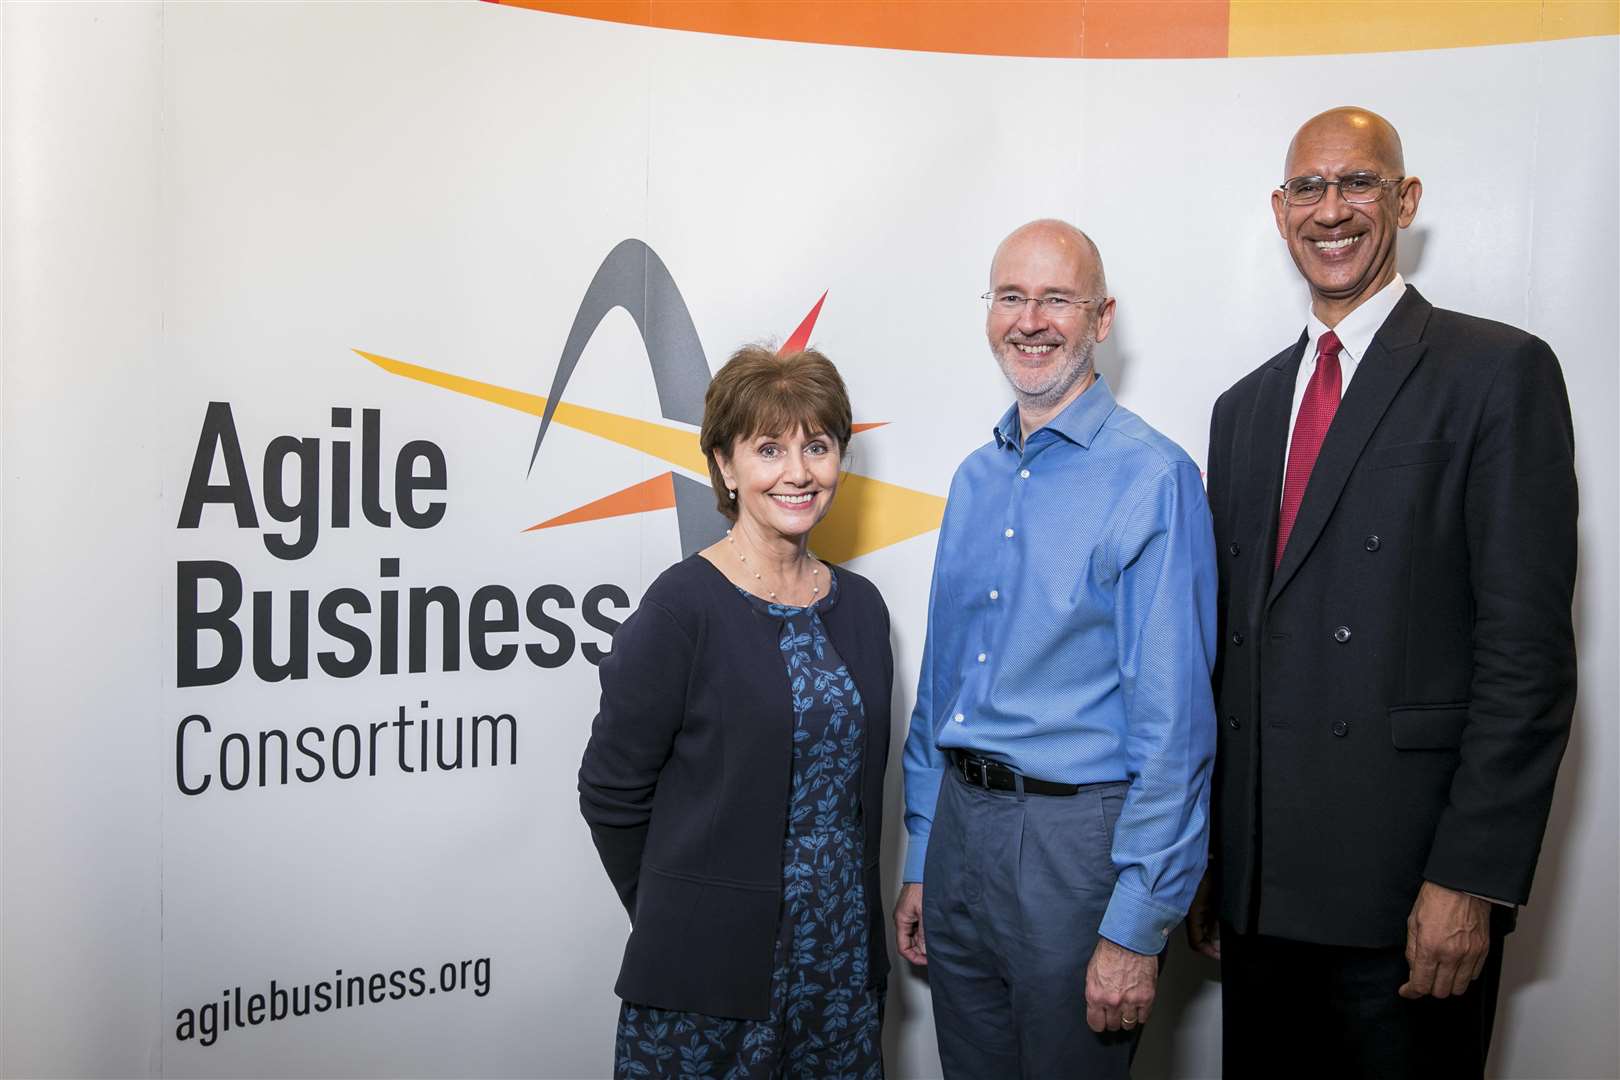 The Agile Business Consortium’s outgoing CEO, Mary Henson, with chairman Geof Ellingham and new chief executive John Williams